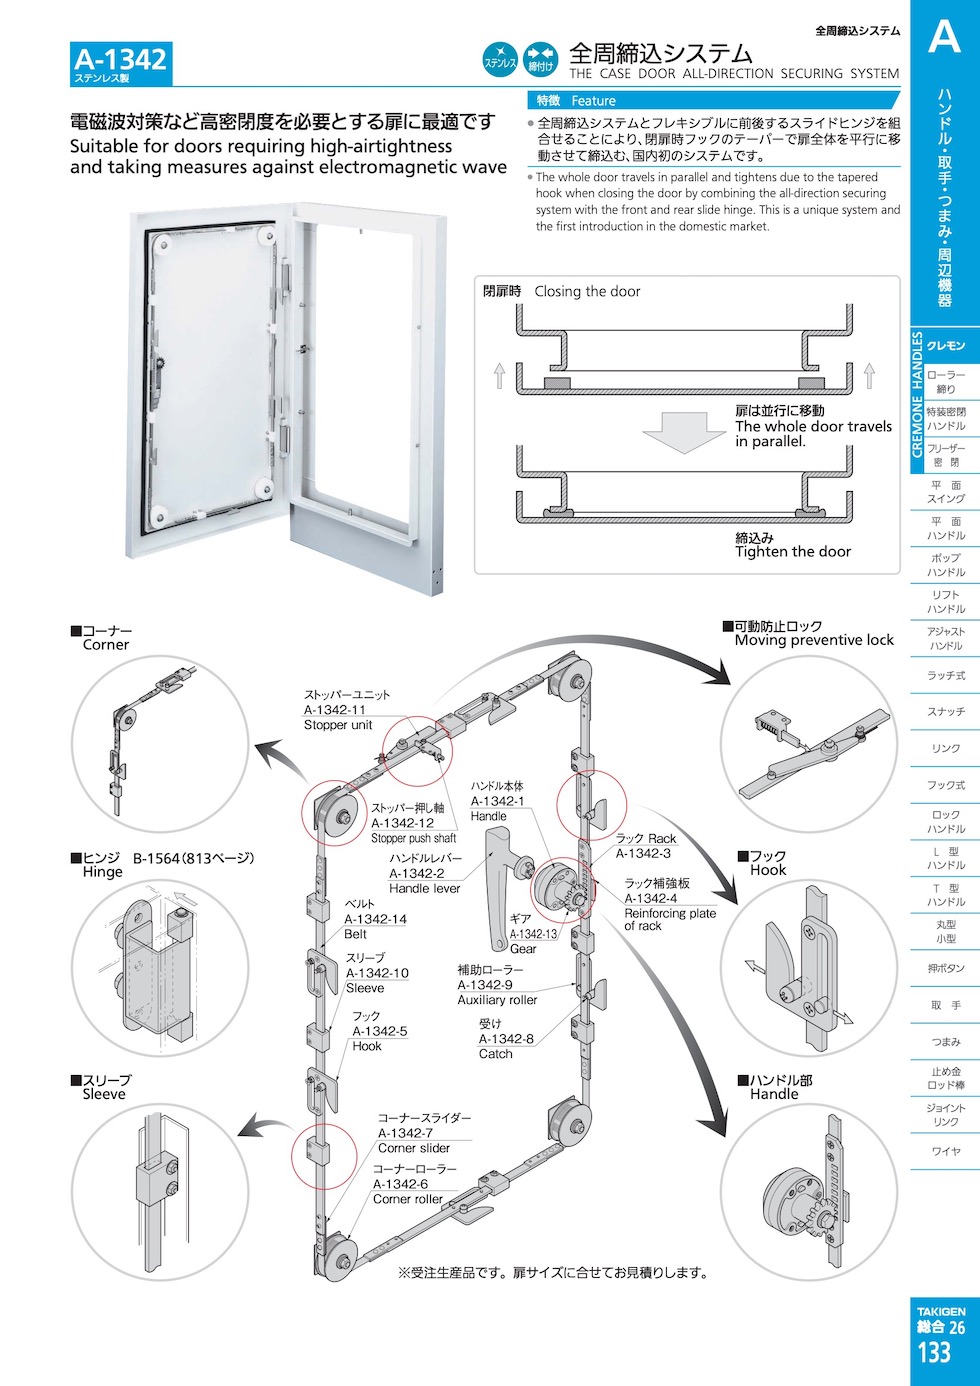 THE CASE DOOR ALL-DIRECTION SECURING SYSTEM